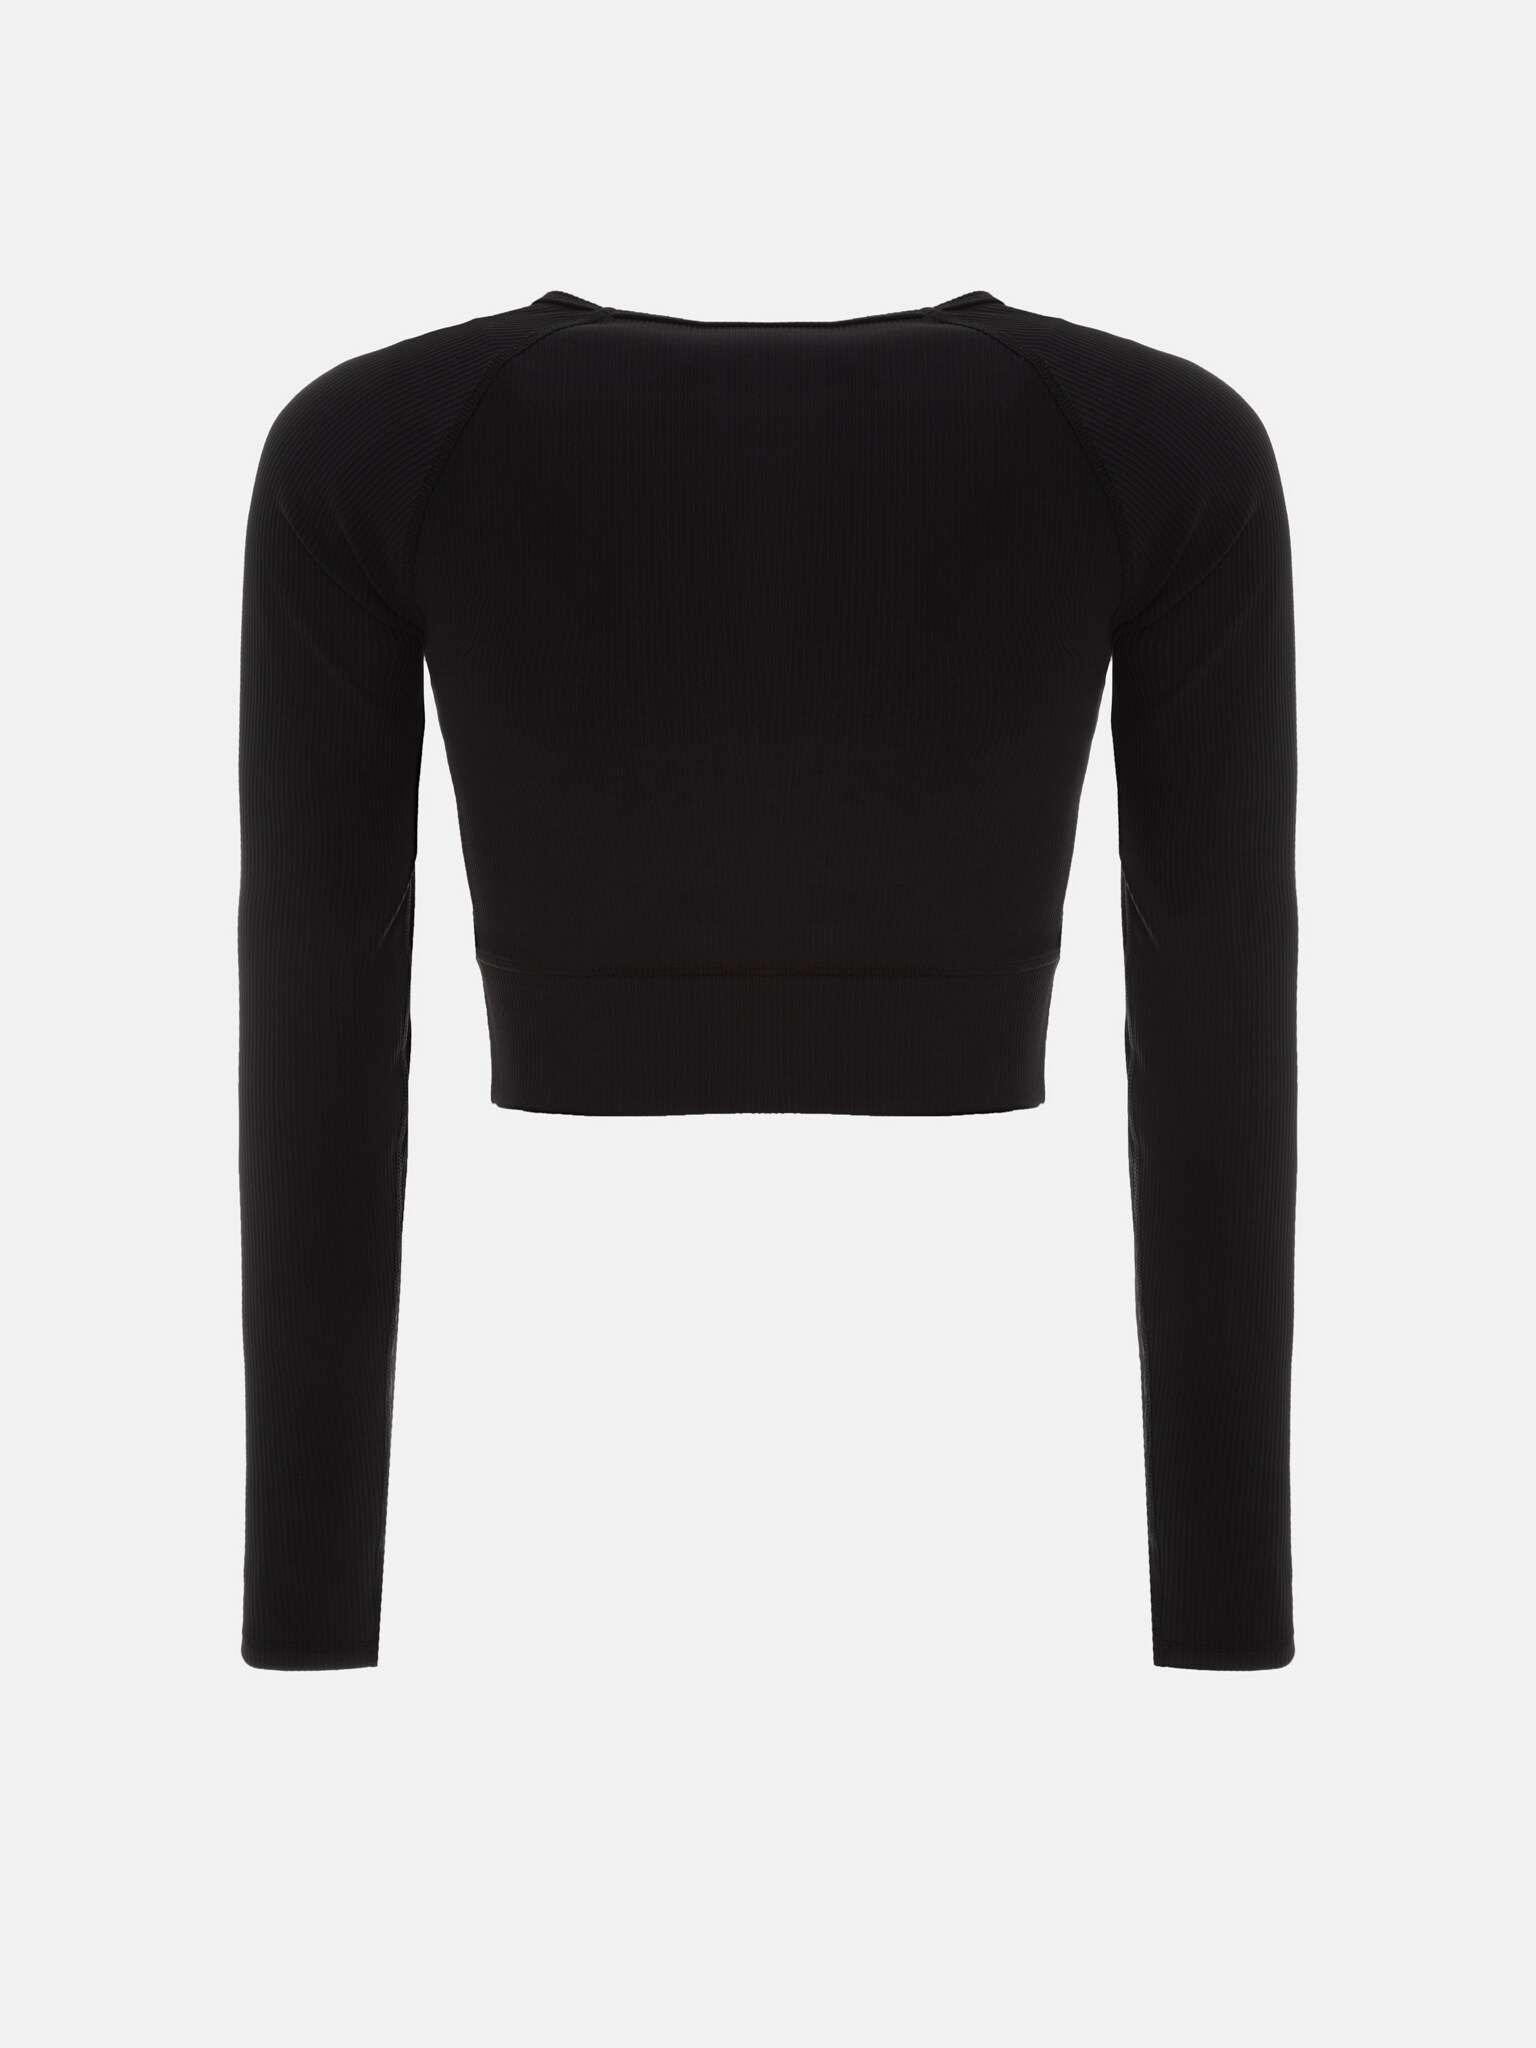 Ribbed stretch crop top :: LICHI - Online fashion store